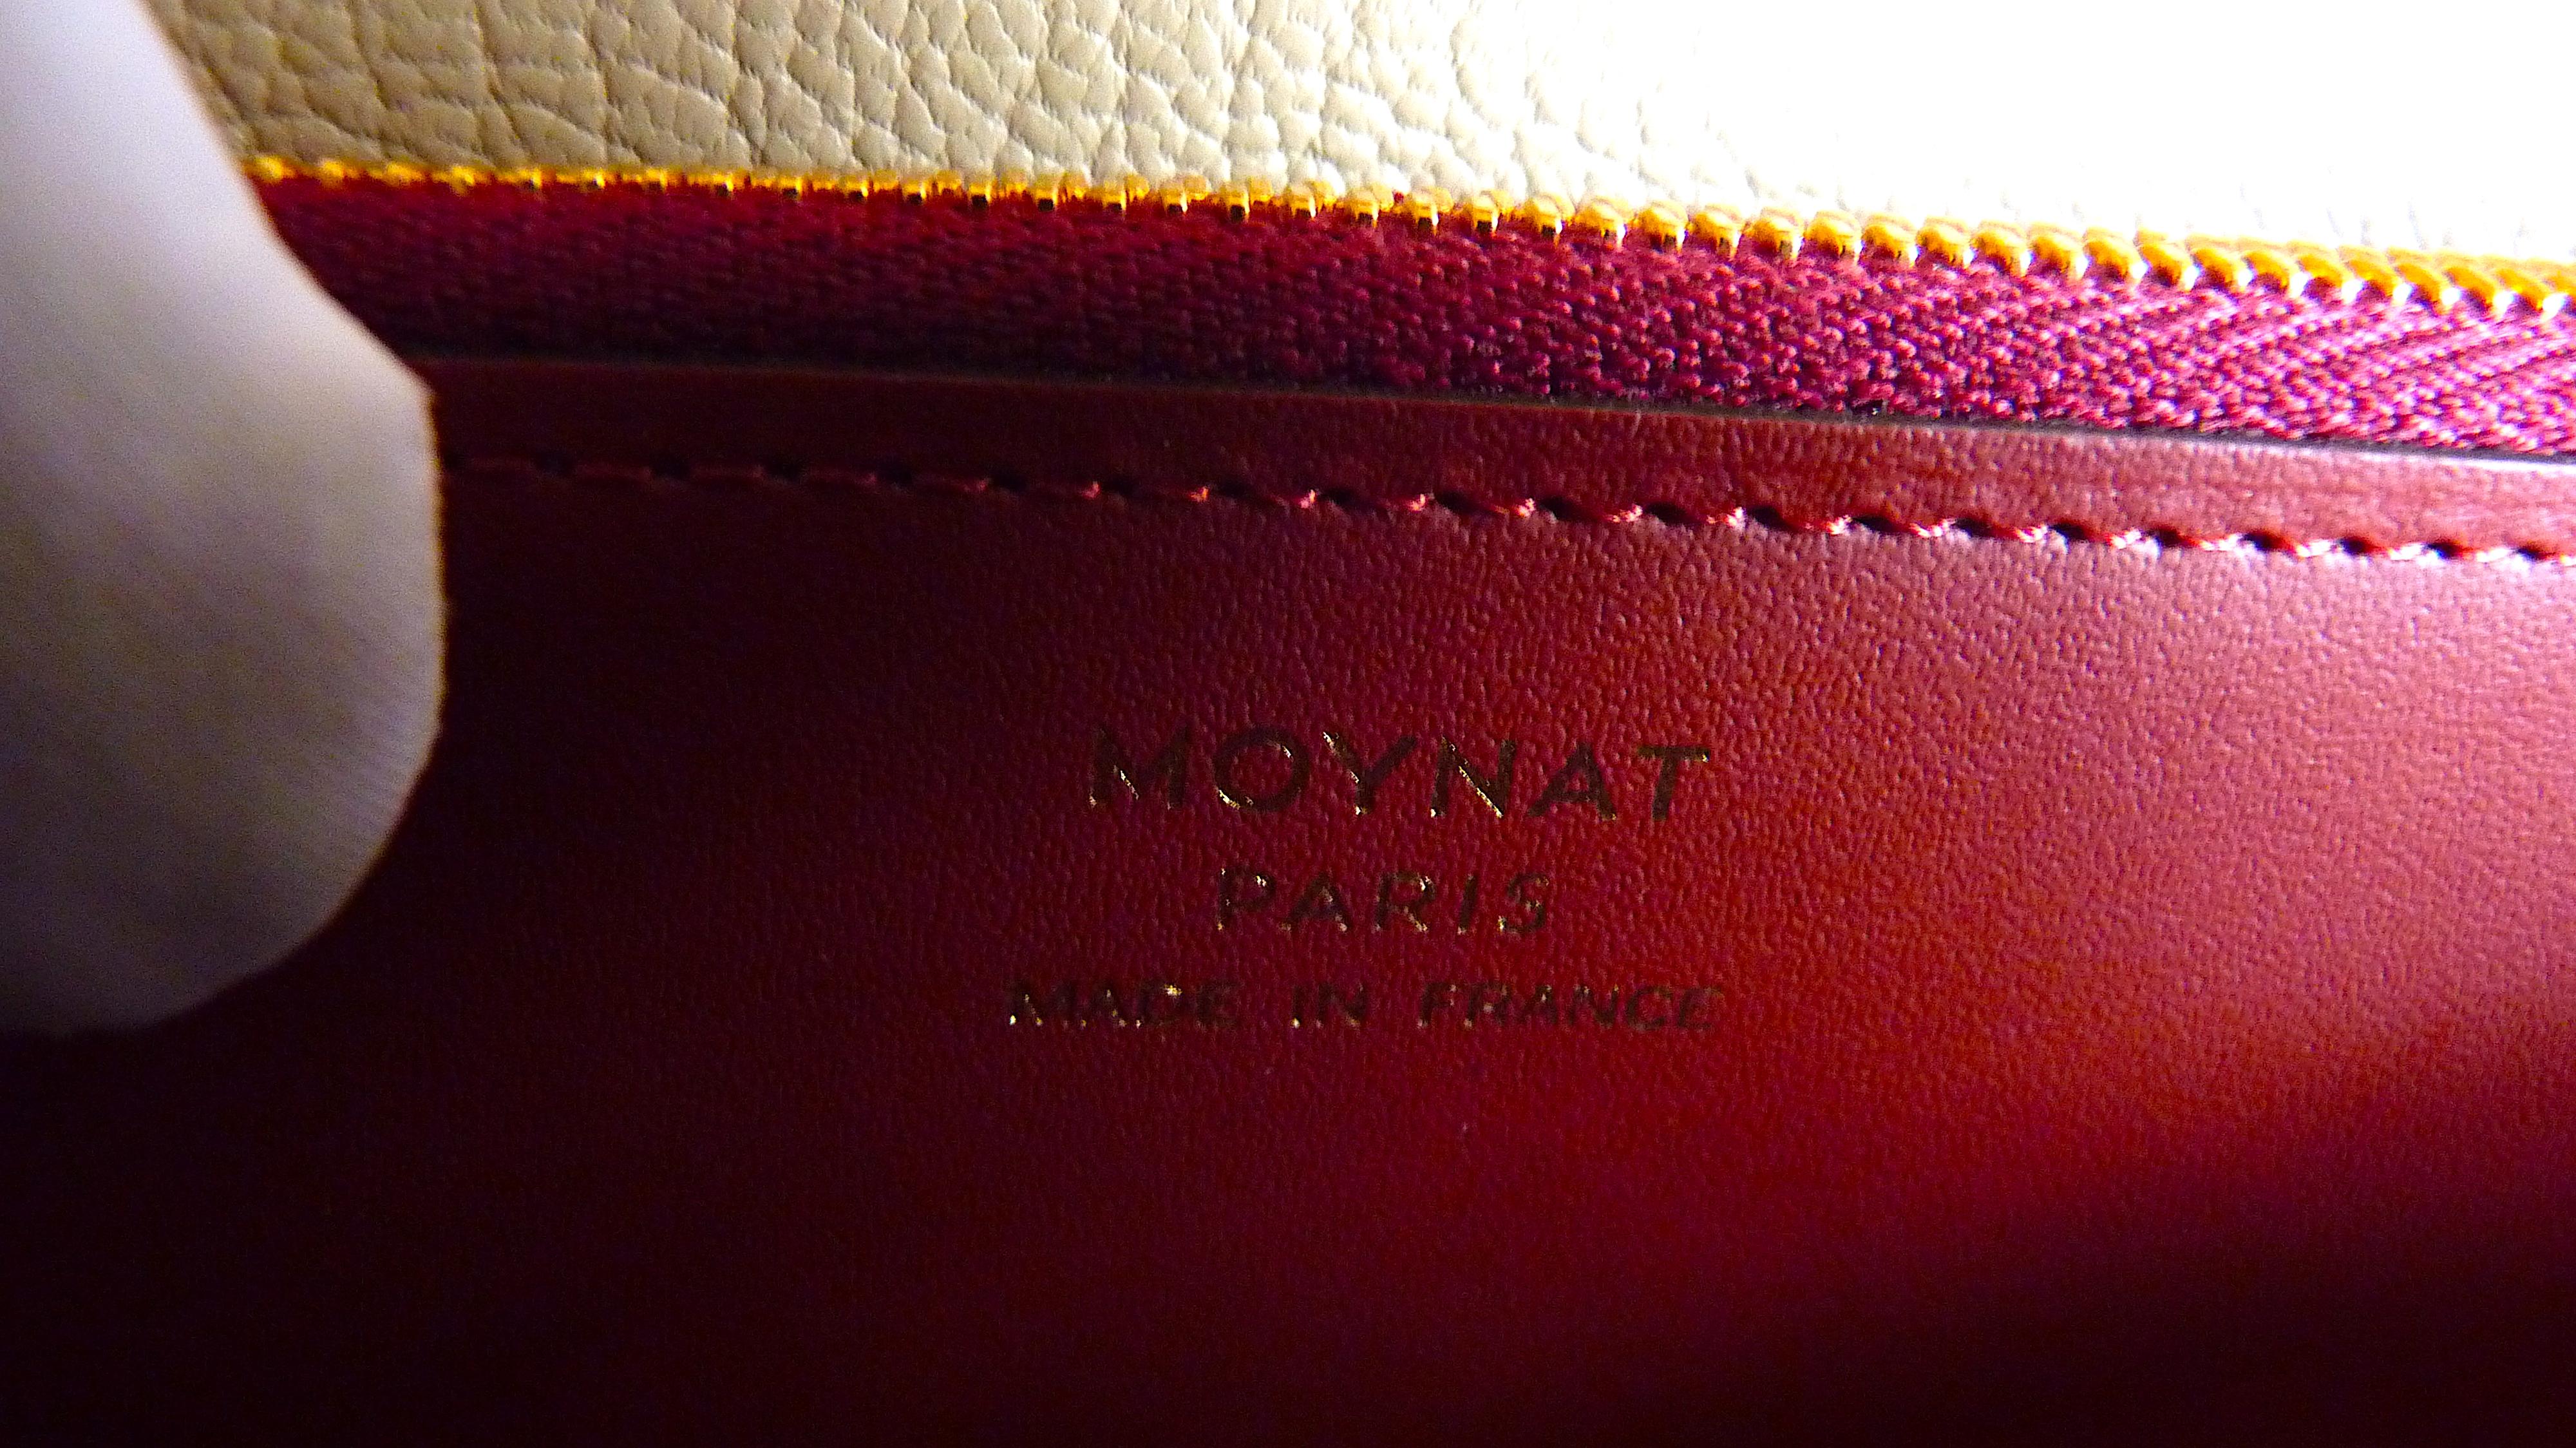 Moynat Wallet « Mirage »
Perfect wallet, compartment for cash, notes, cards ...
Burgundy Leather inside
Burgundy and Gold Canvas outside with Moynat Logo
Stamped Moynat Paris Made in France inside

Condition : Brand new, never used, absolutely